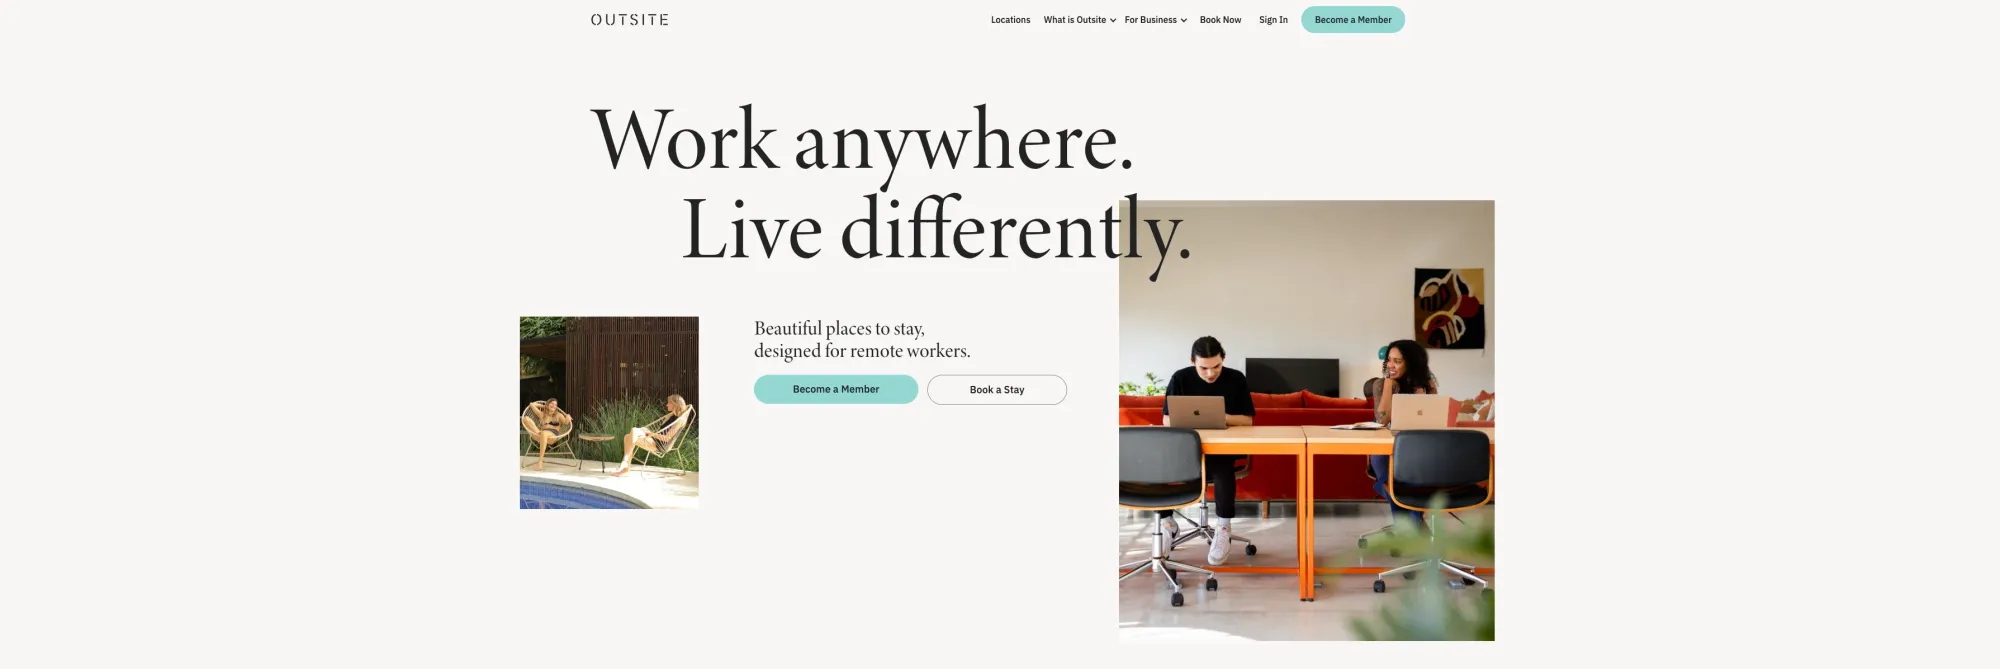 outsite, a rental site for digital nomads